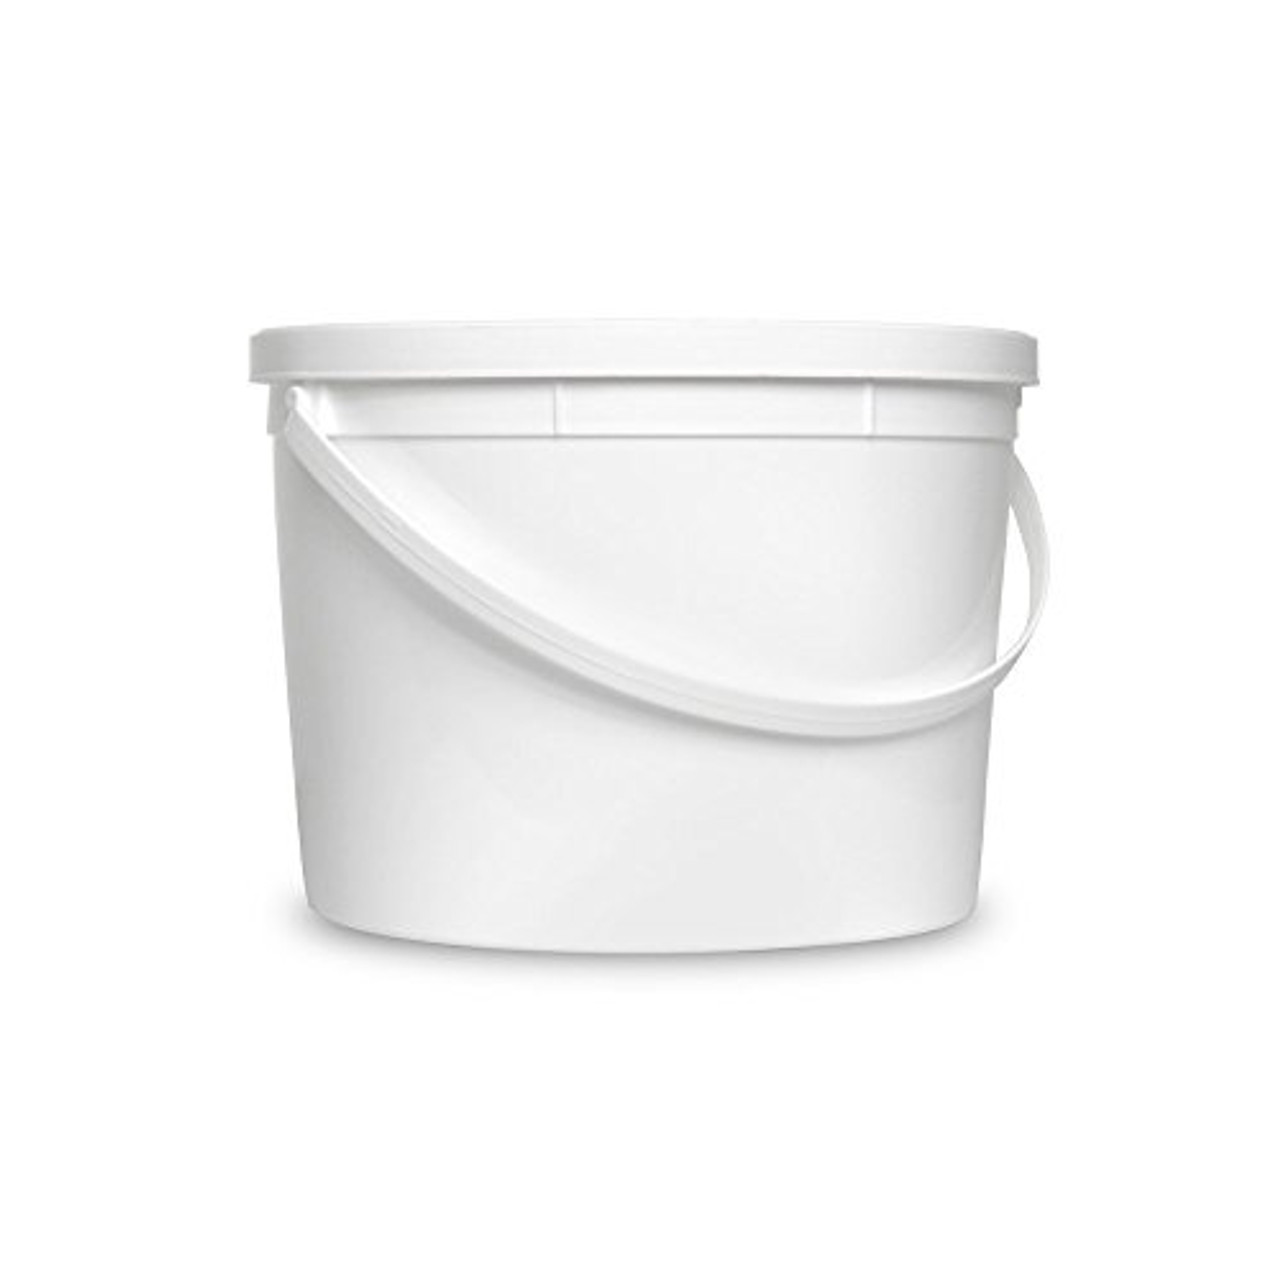 White Economy Square 4 Gallon Plastic Bucket, 18 Pack, Lid Not Included